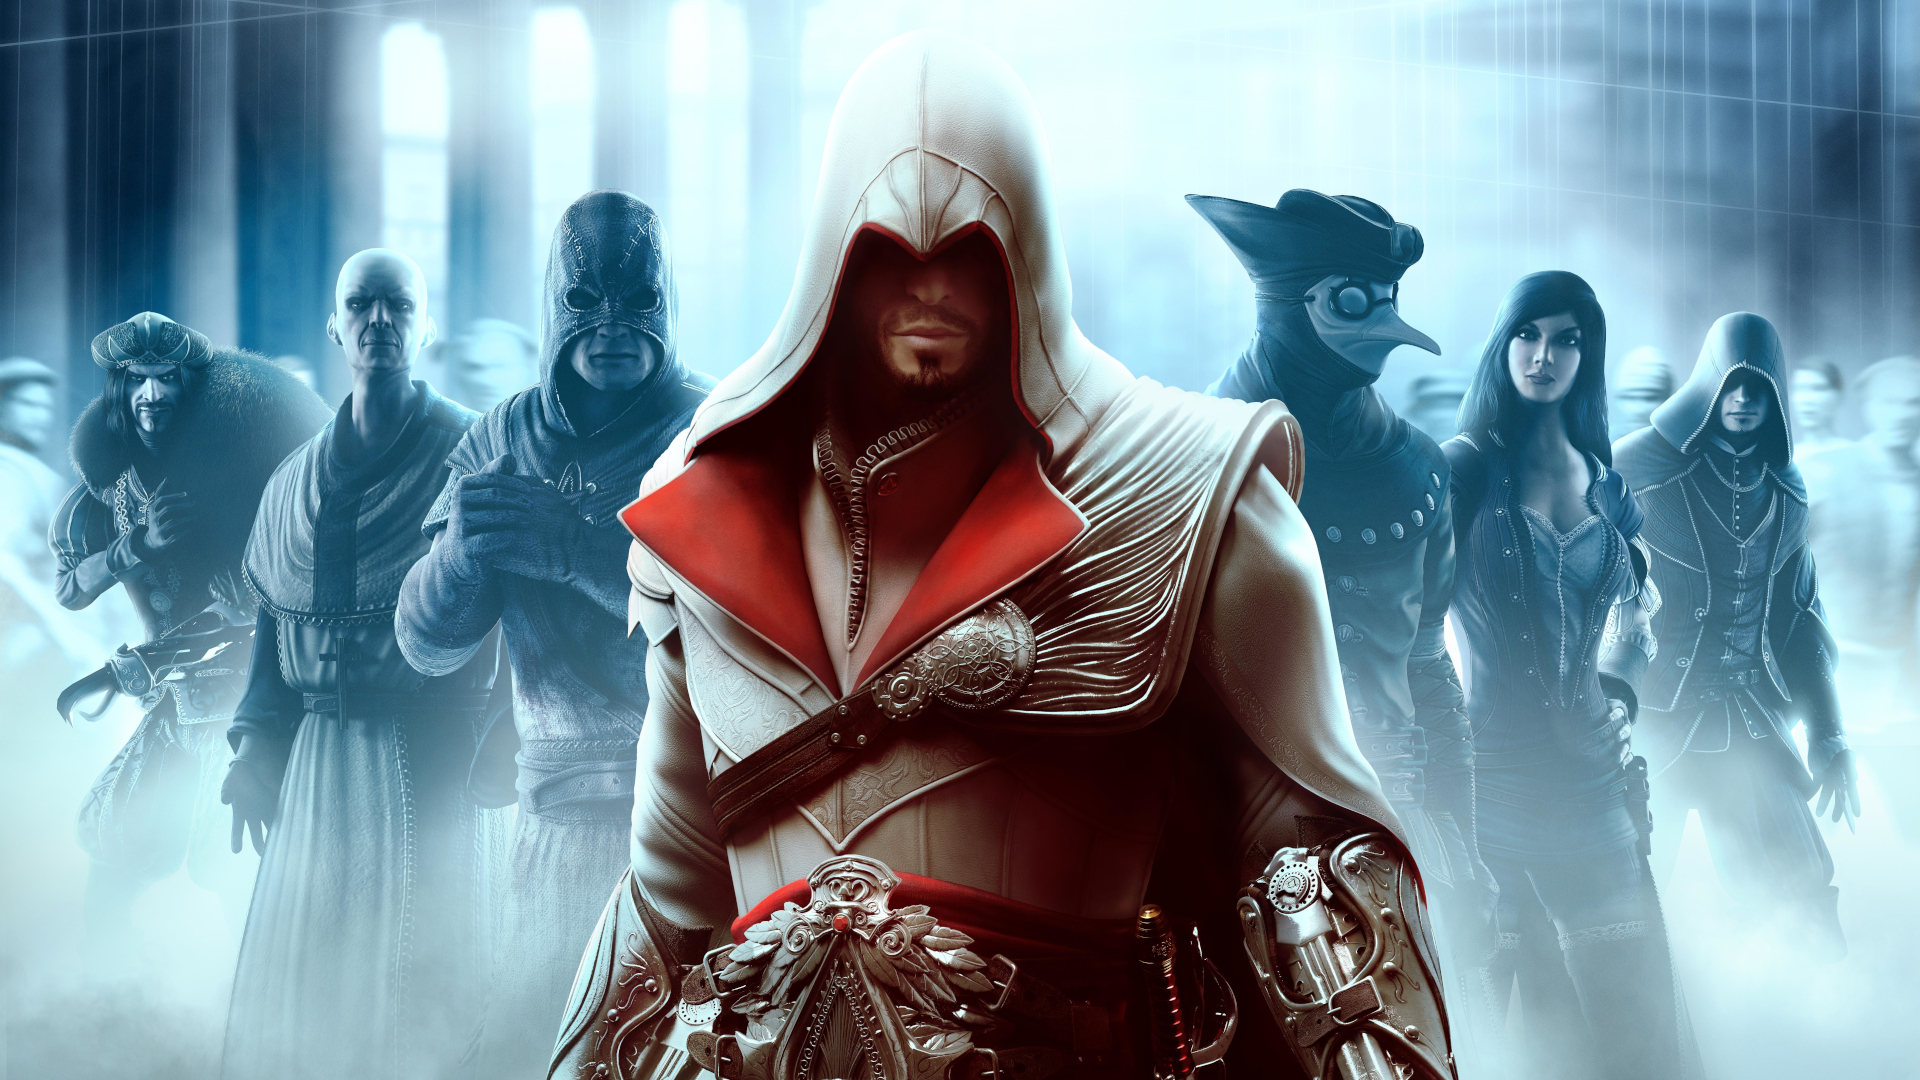 Ezio in Assassin's Creed Brotherhood standing in front of a row of other assassins